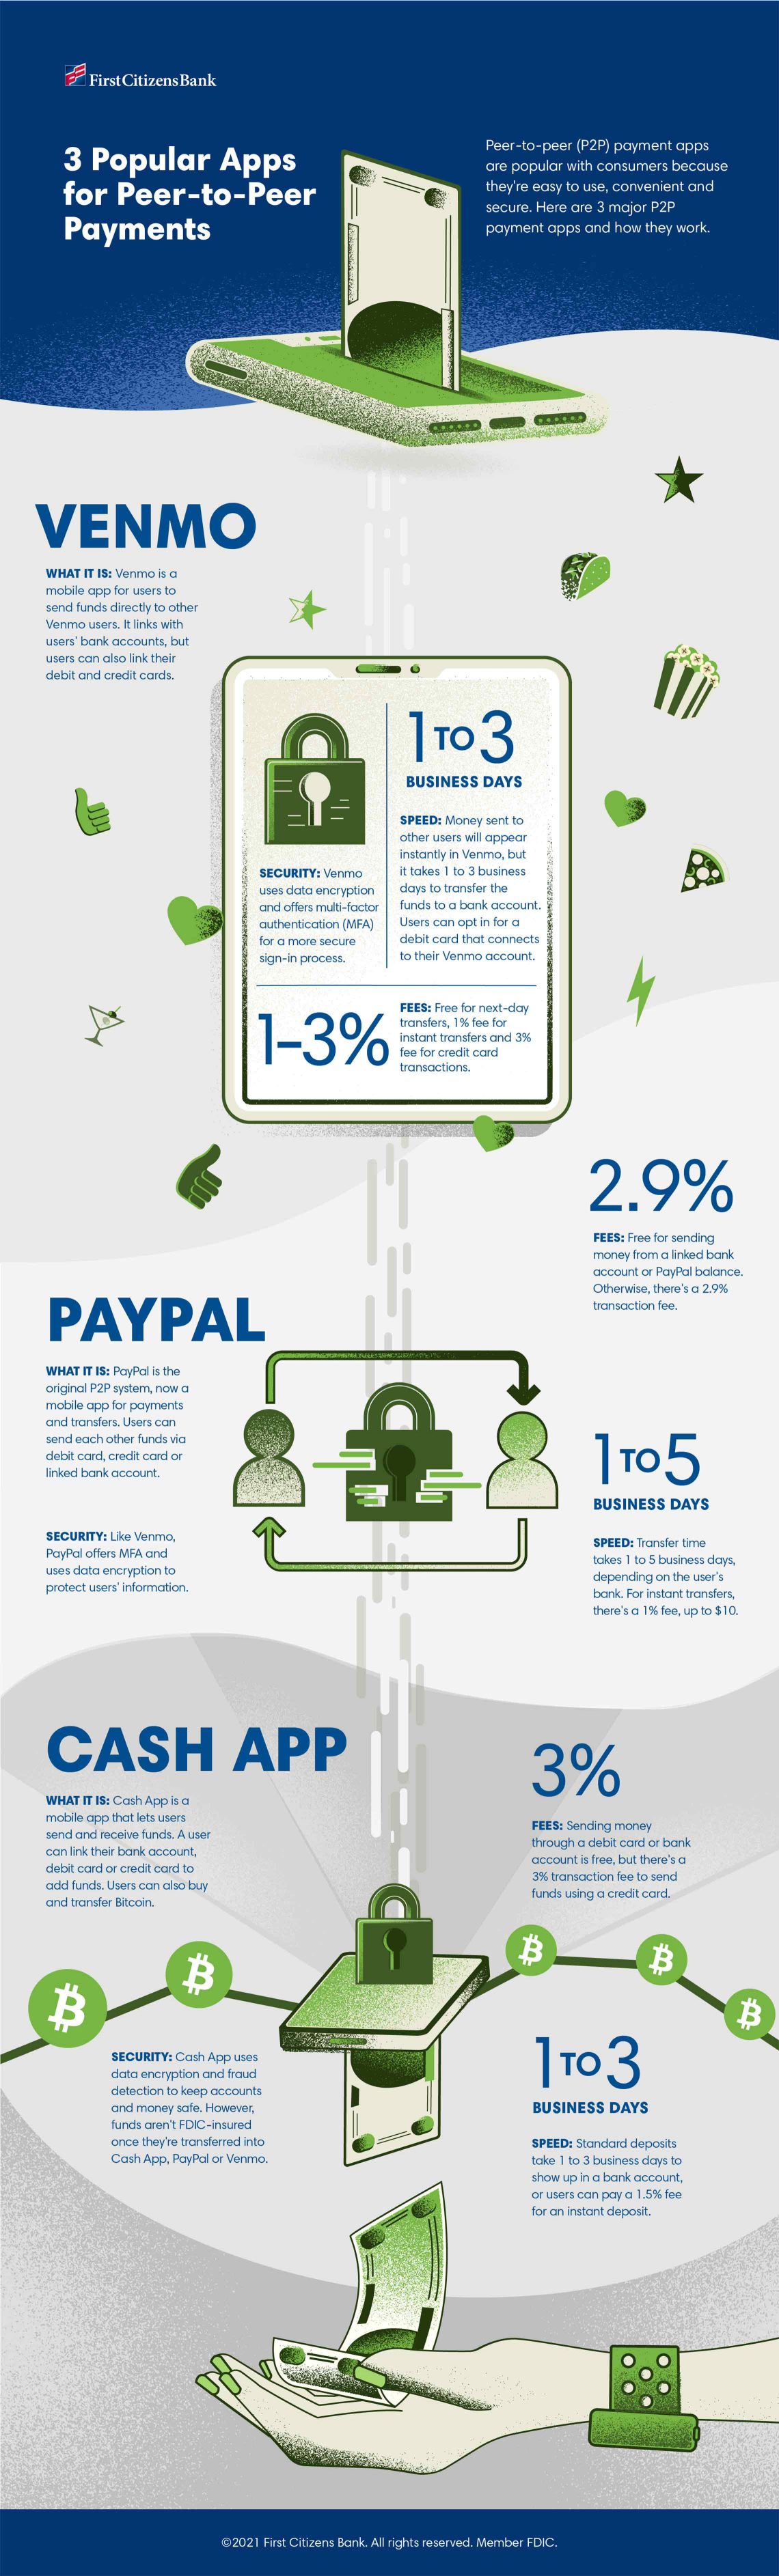 3 Popular Apps for Peer-to-Peer Payments infographic with text description below.